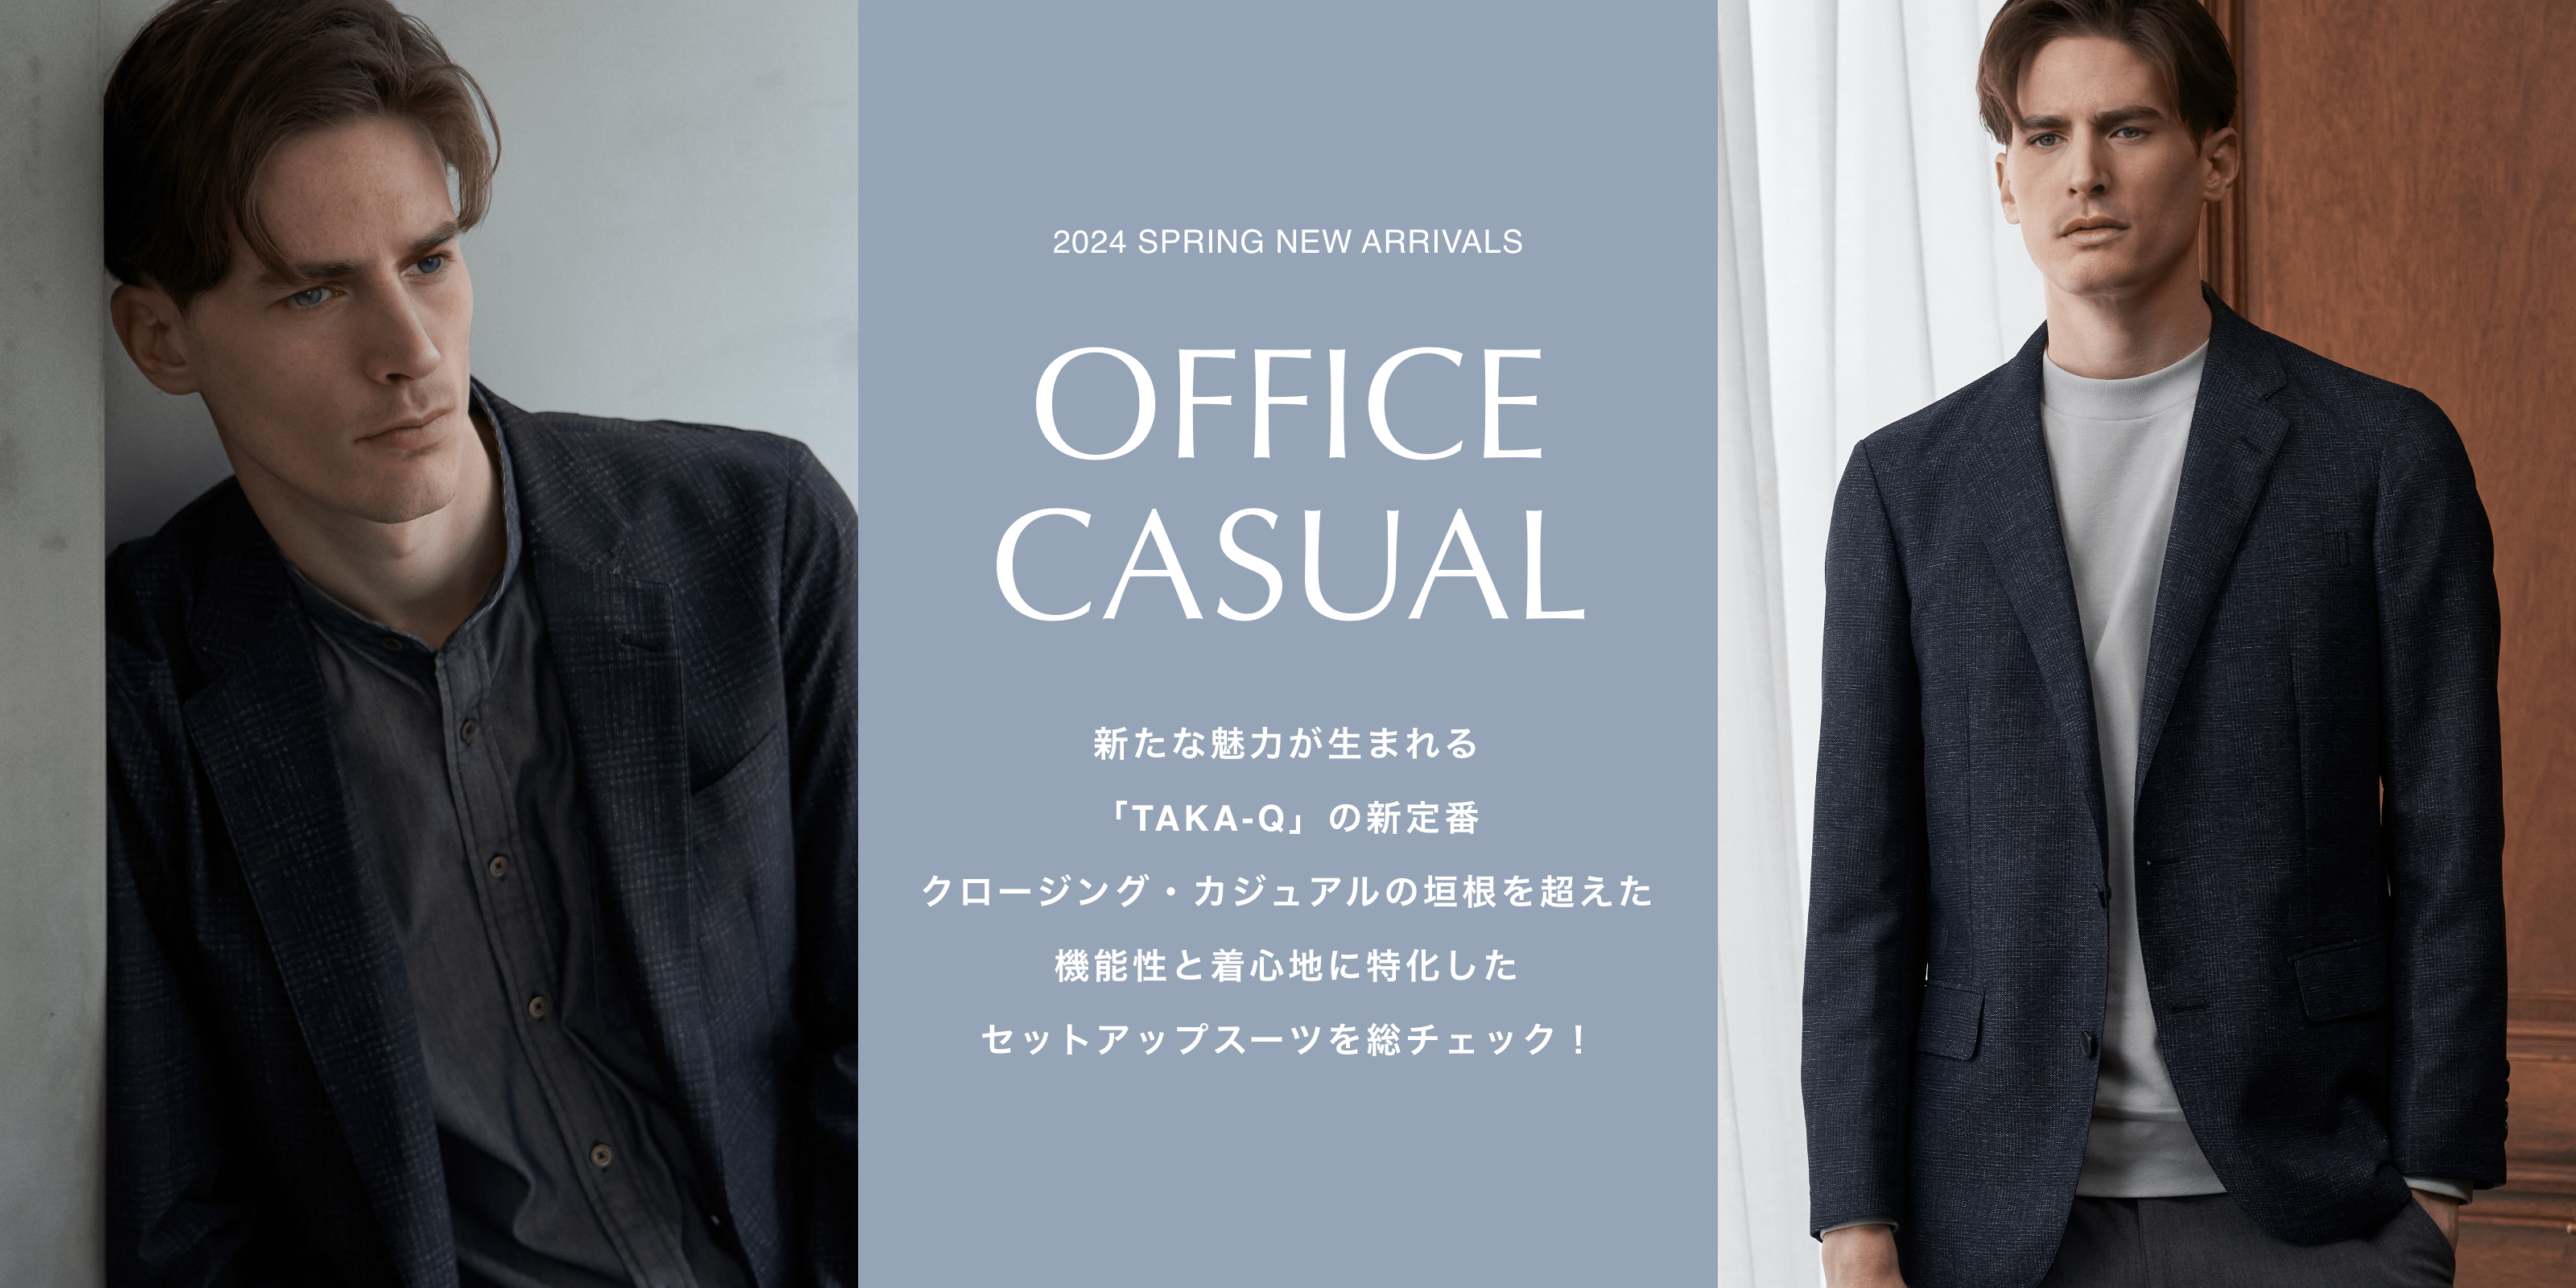 2024 SPRING NEW ARRIVALS OFFICE CASUAL